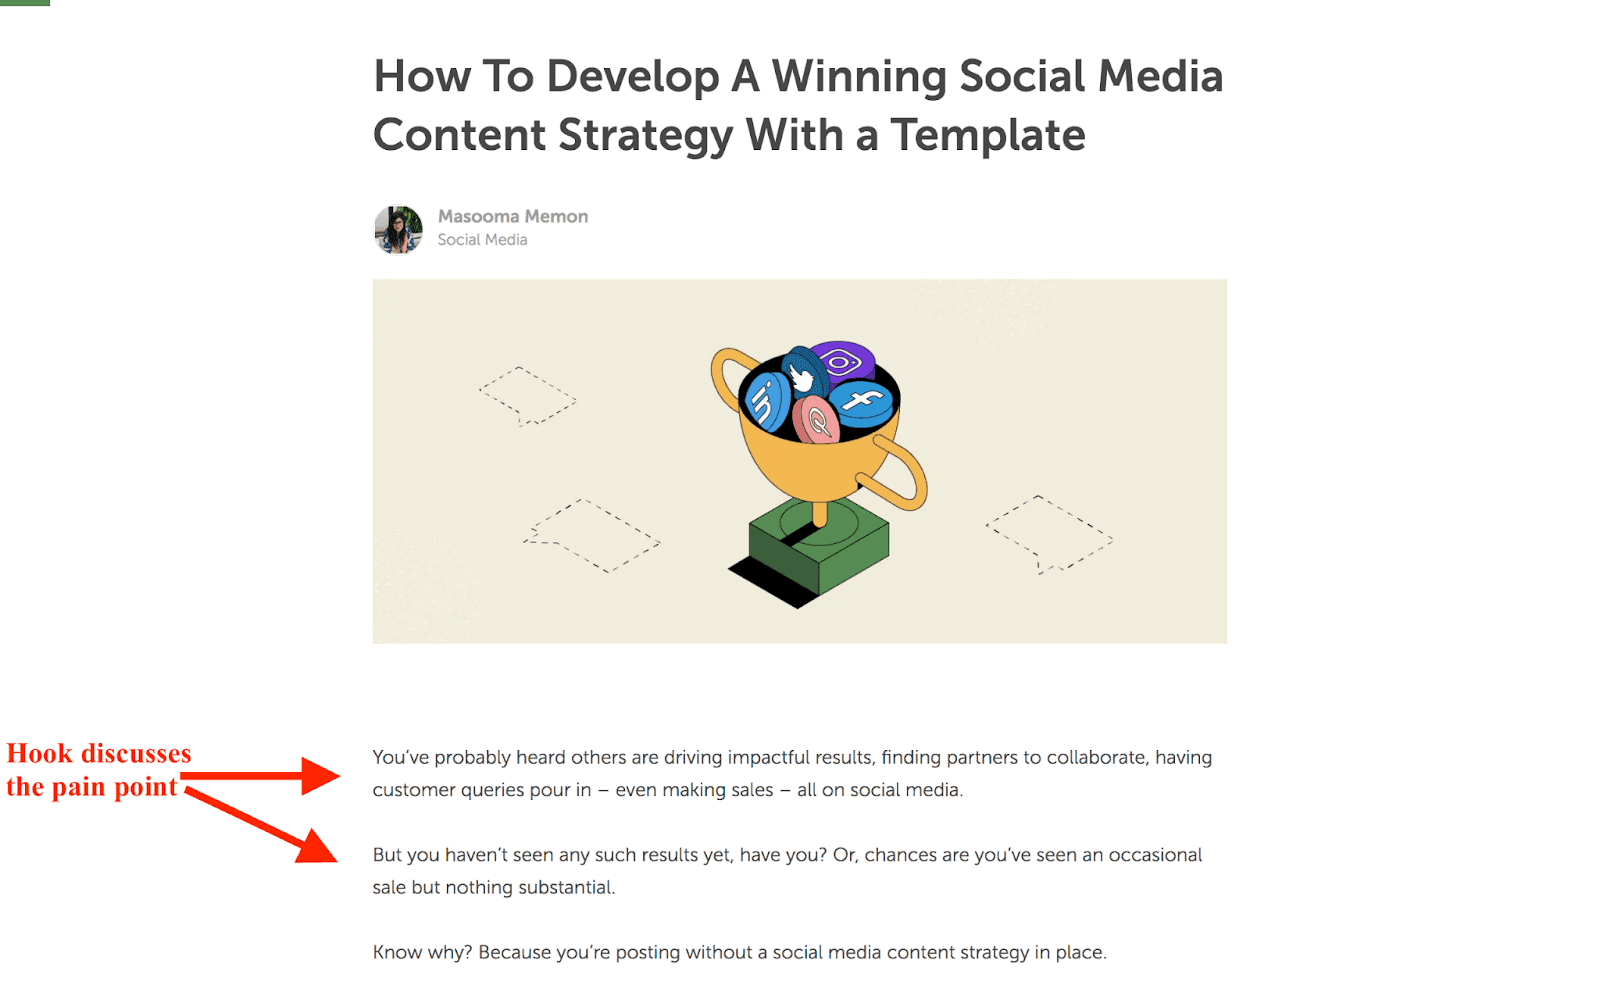 How to develop a winning social media content strategy with a template